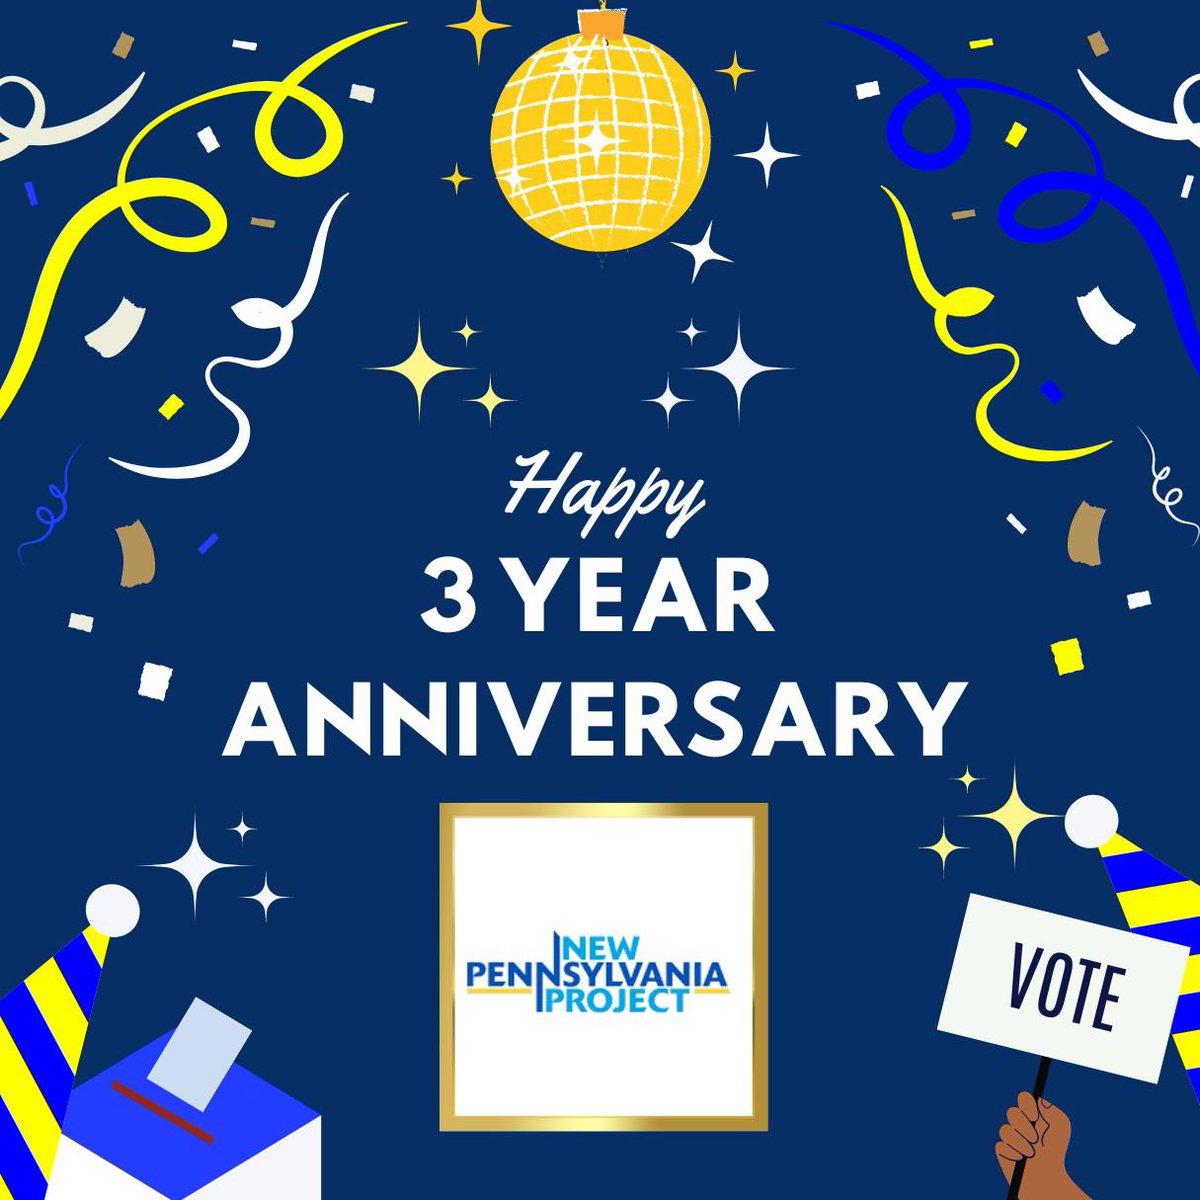 The @NewPennsylvania Project is 3 today! 🎉🎊

Tens of thousands registered!

In 3 years, the voting rights org has gone from a staff of one (me) to more than 50. Today we’ll celebrate all the achievements and accomplishments of #TeamNPP — we hope you join in! #VotePA